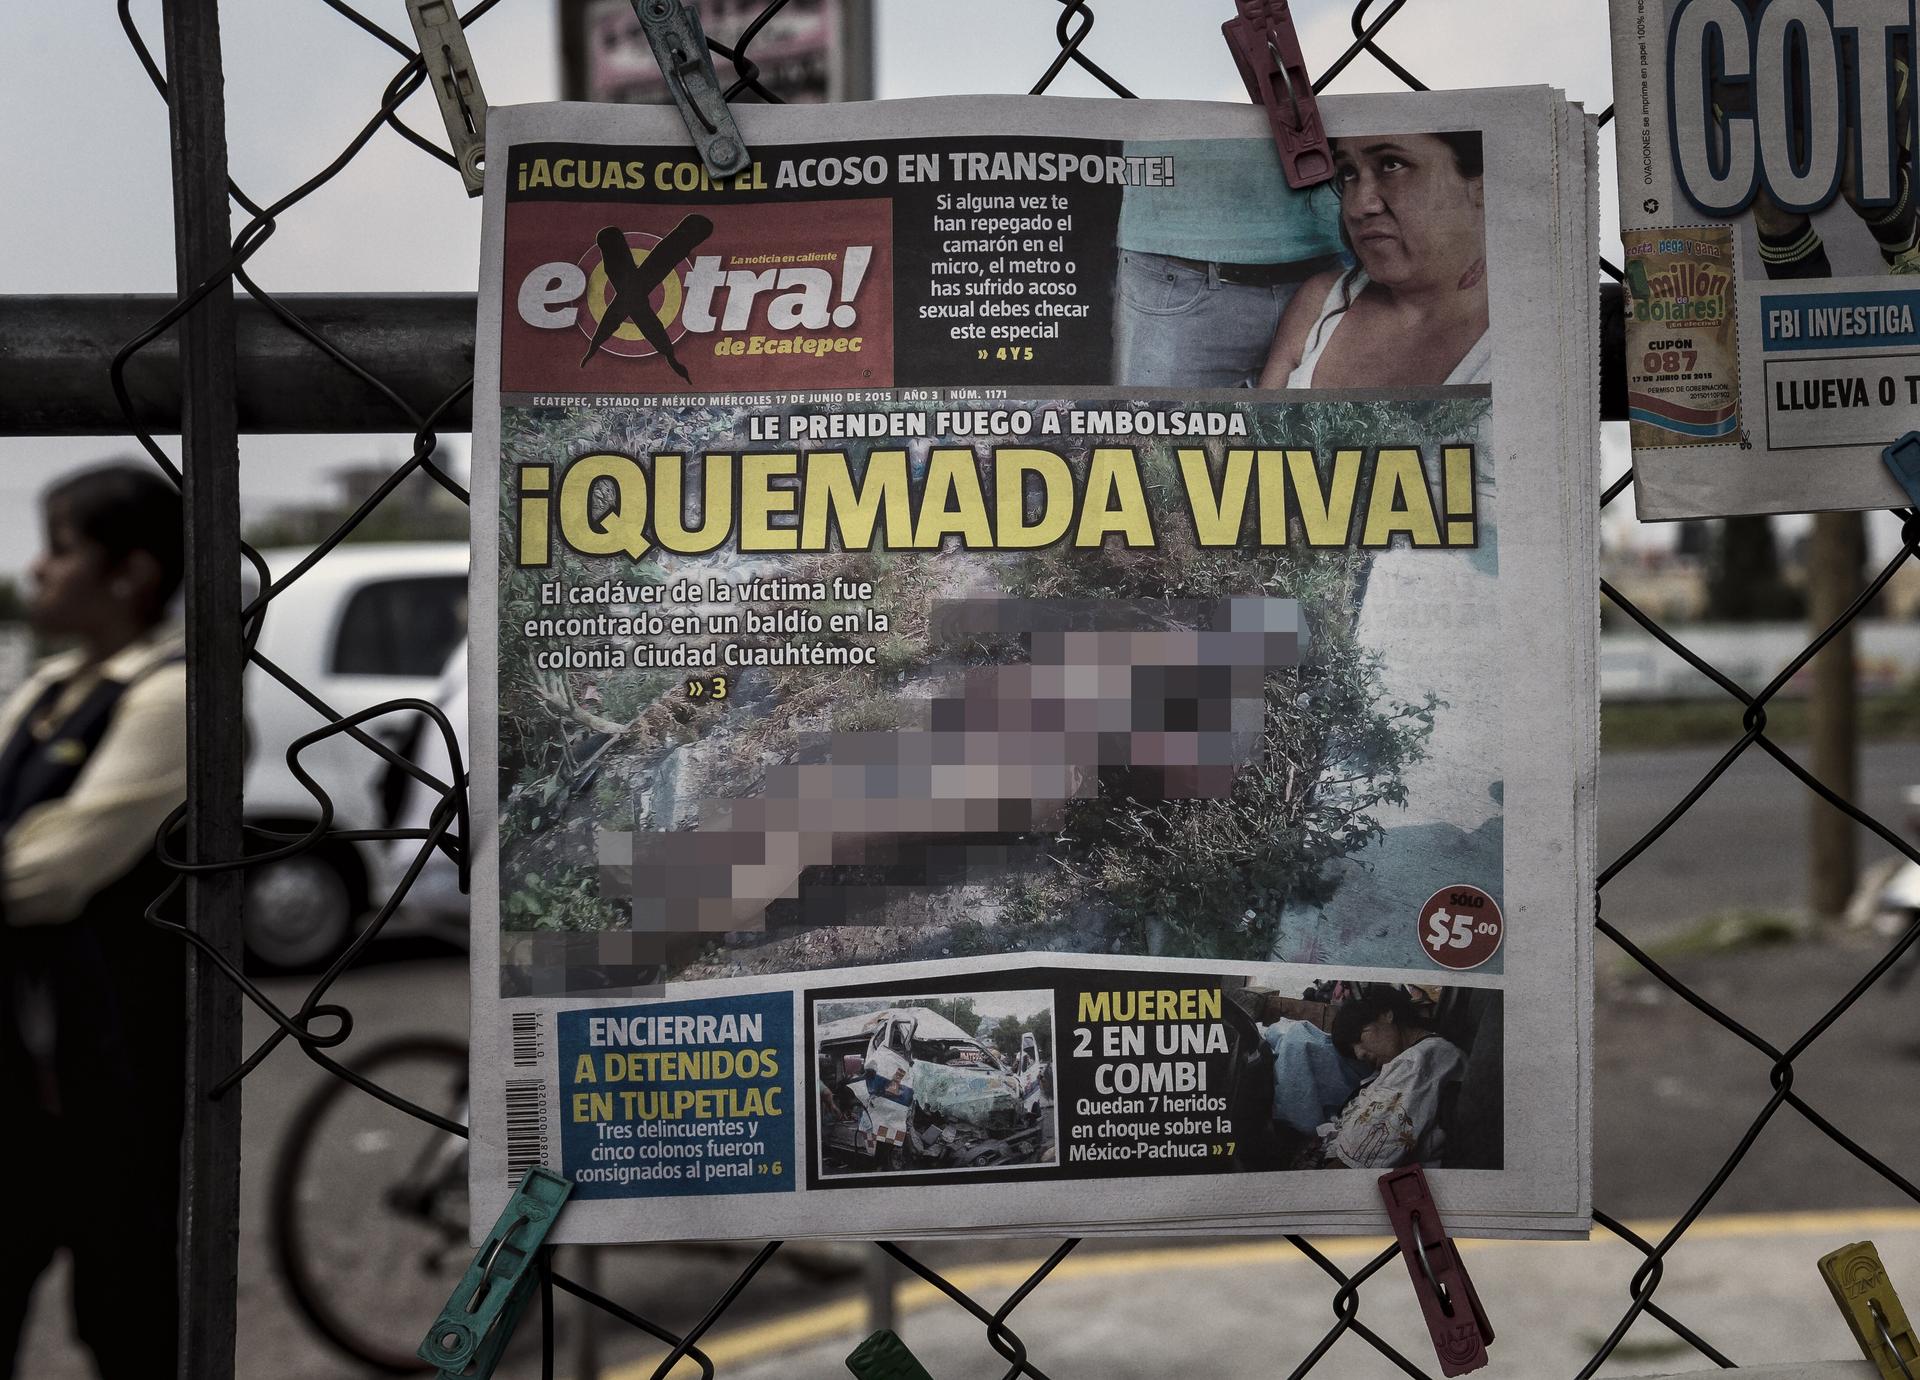 The front page of a newspaper displayed on a fence.